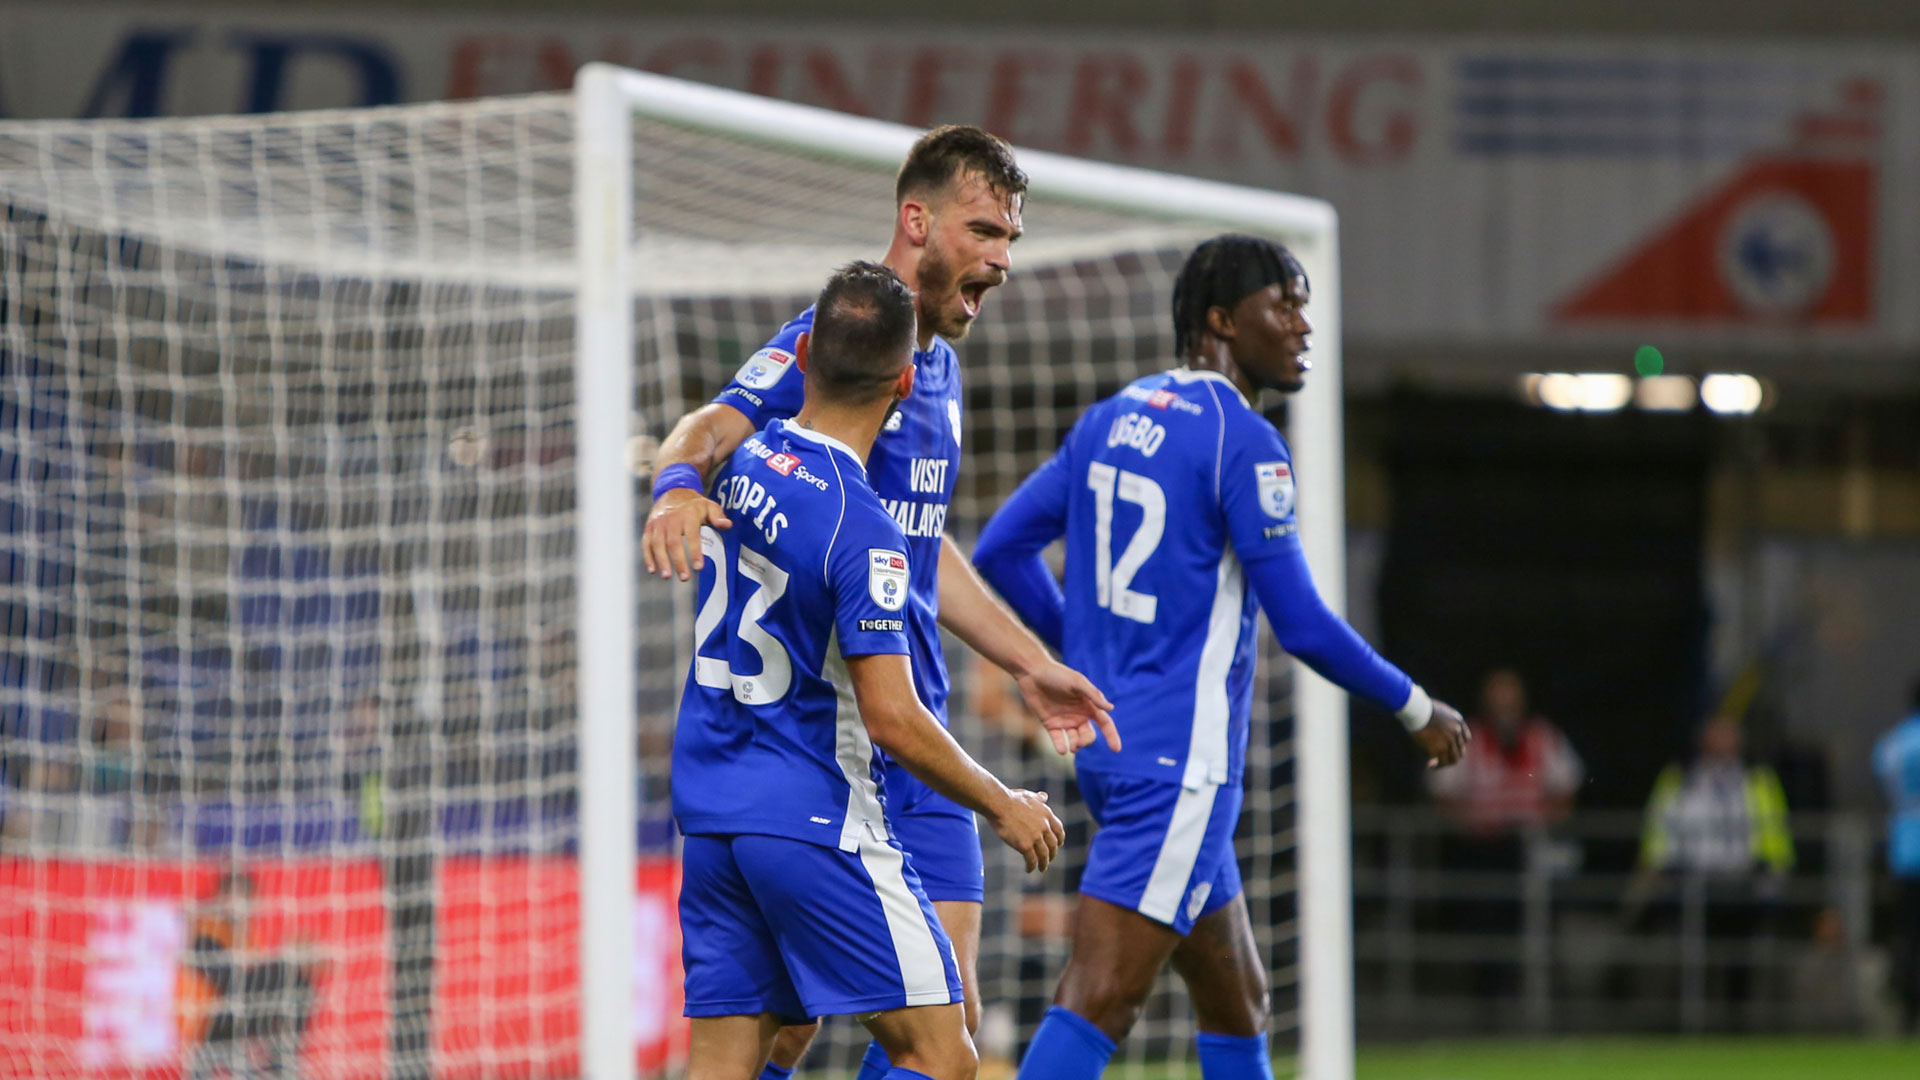 REPORT: Cardiff City 3-2 Coventry City - News - Coventry City